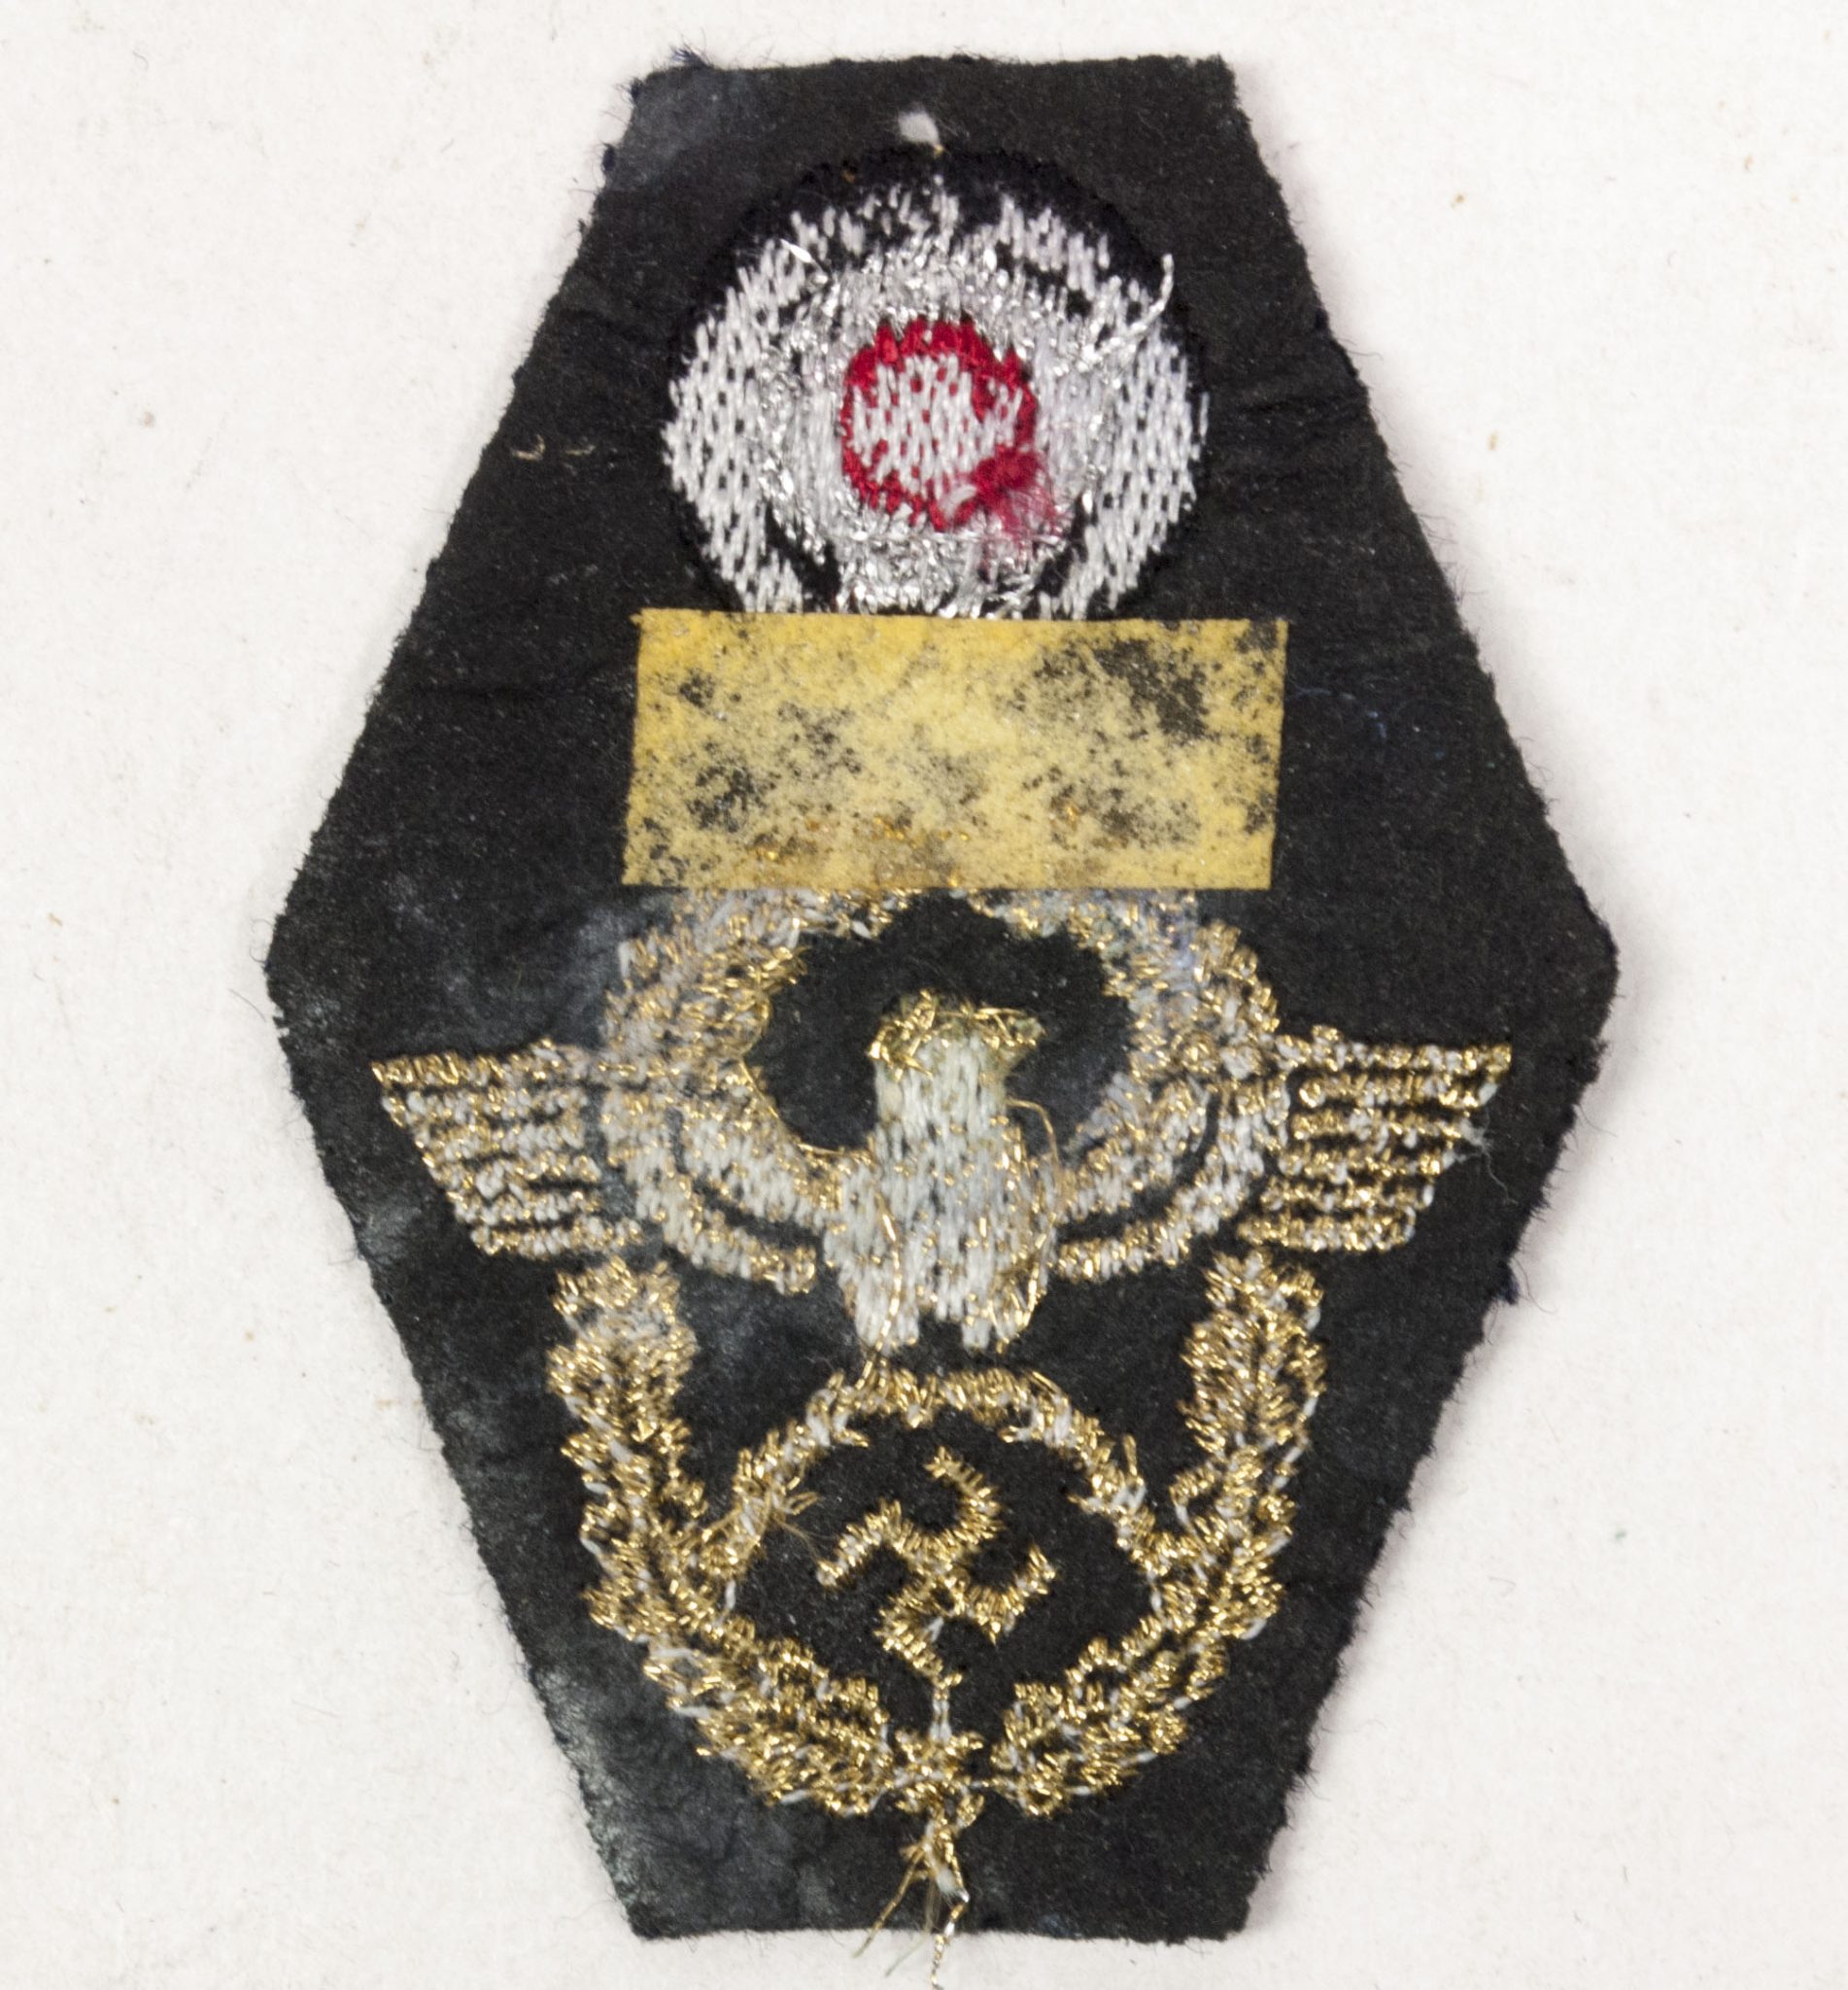 Polizei high leader sidecap eagle with gold bullion